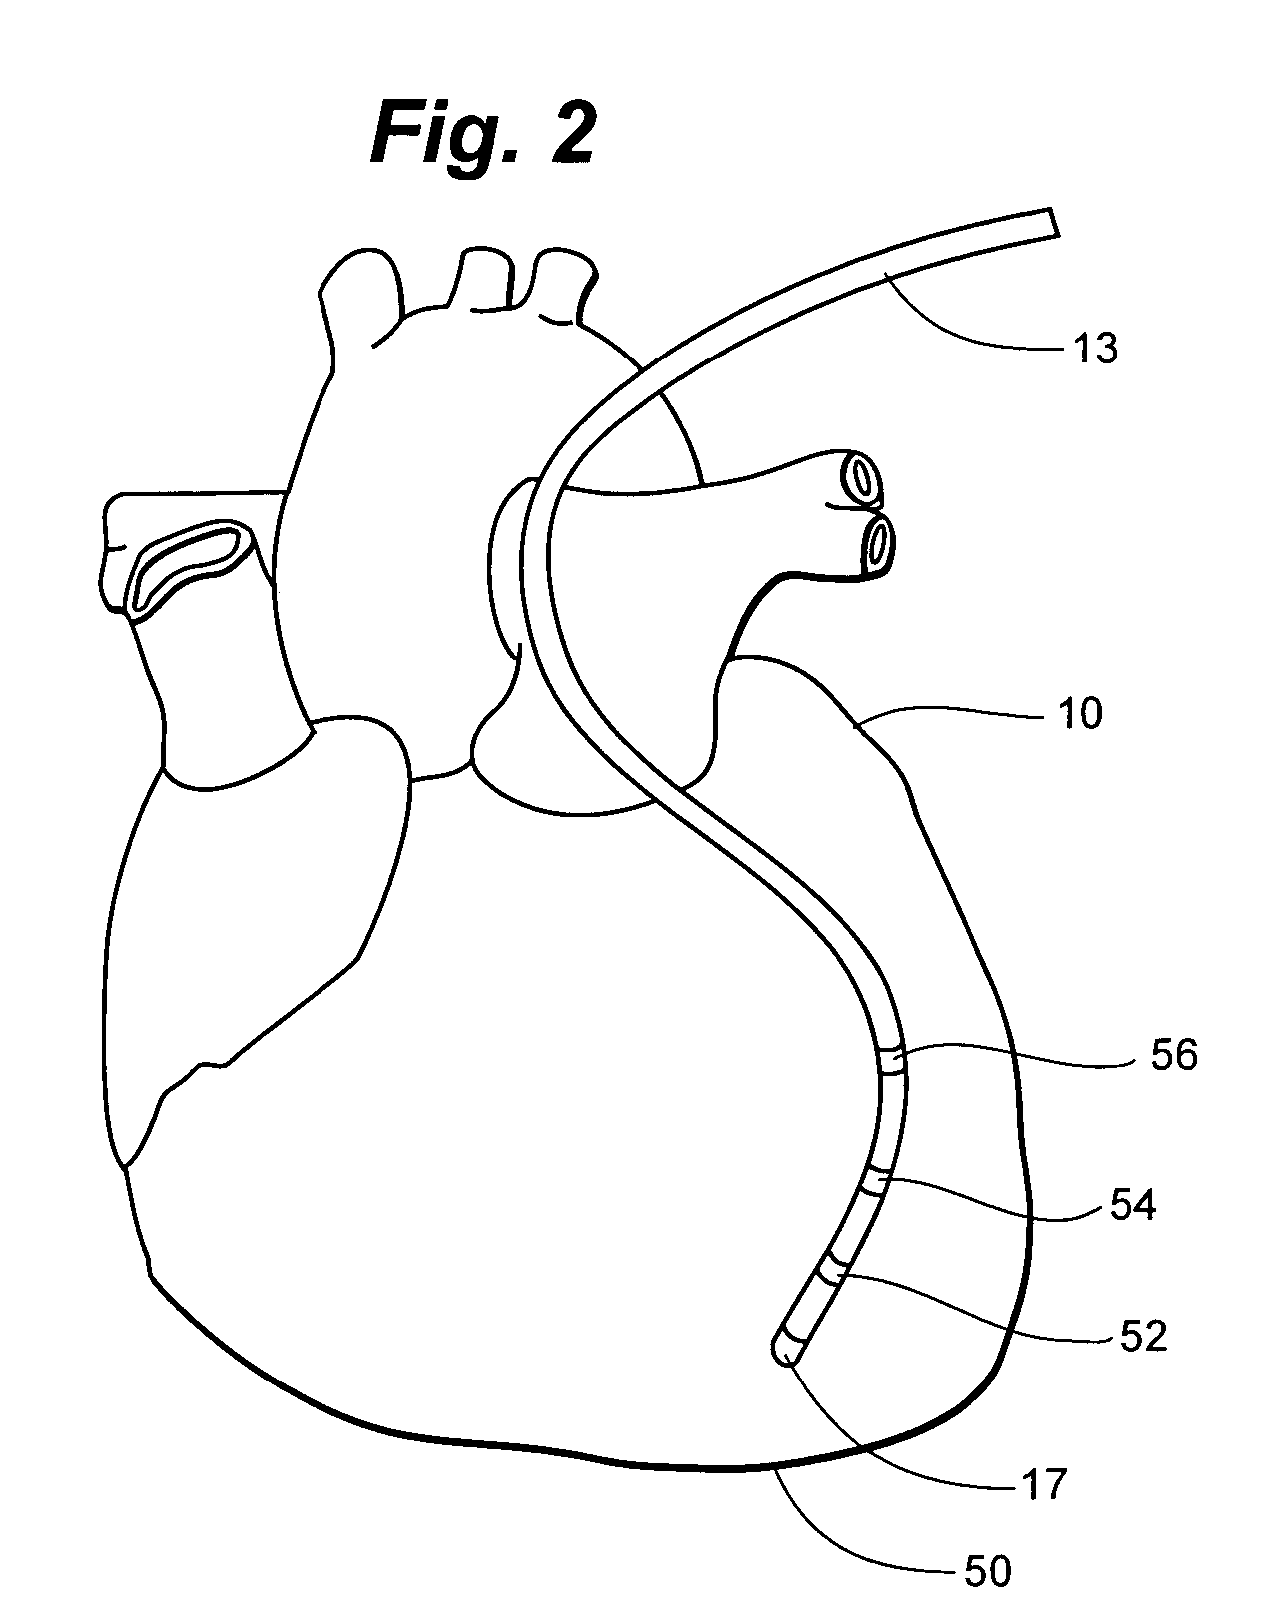 Method and apparatus for catheter navigation and location and mapping in the heart